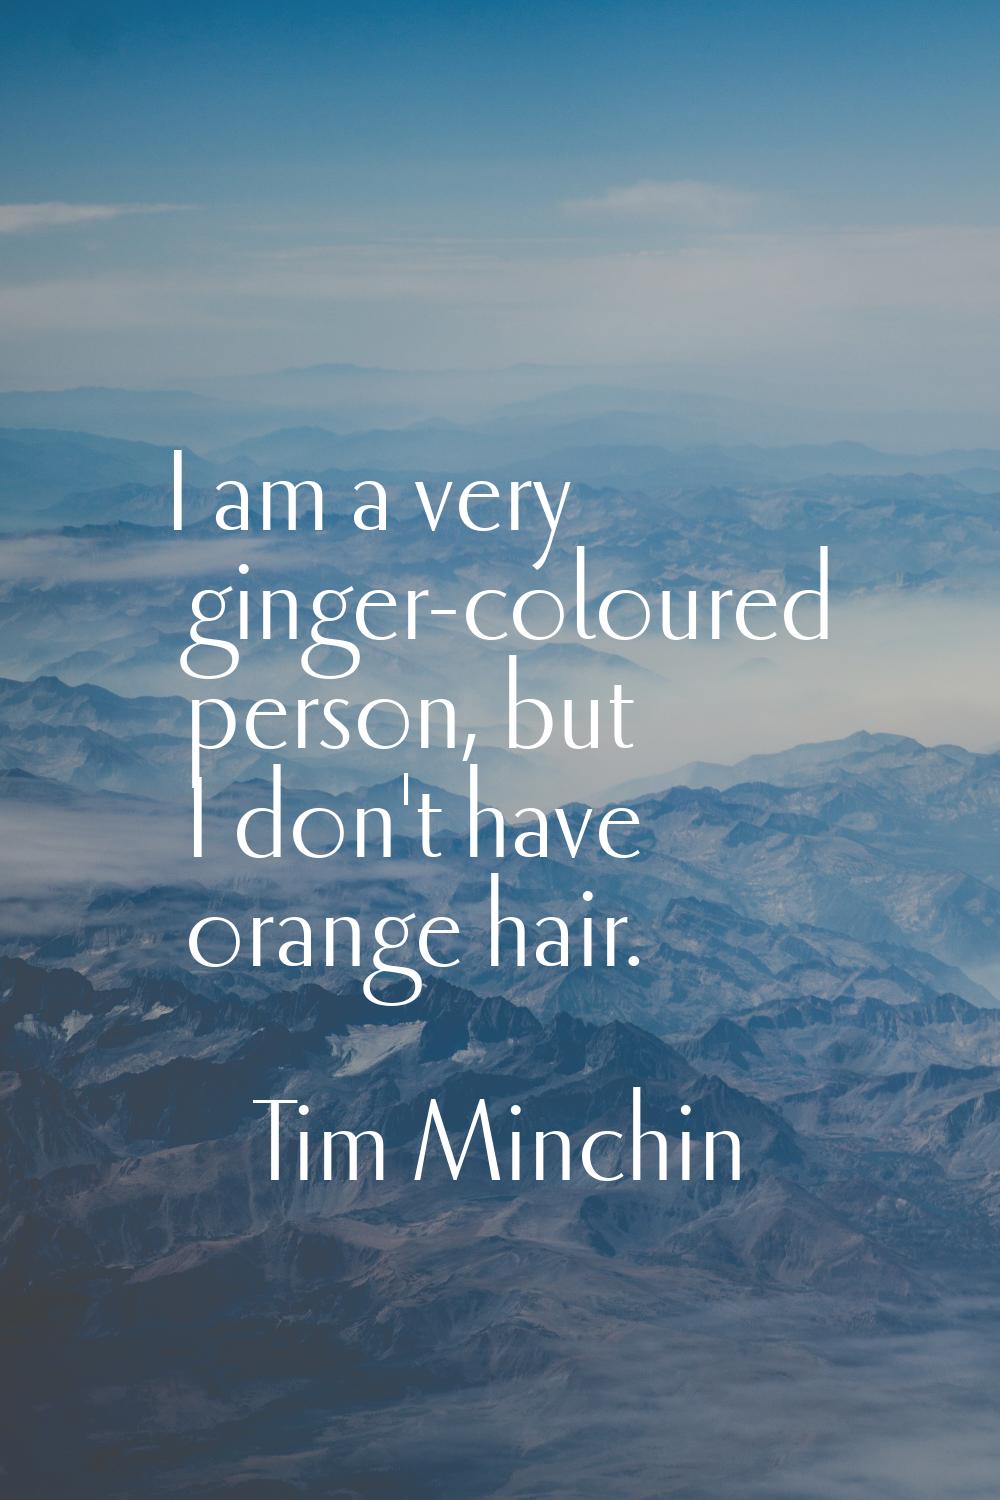 I am a very ginger-coloured person, but I don't have orange hair.